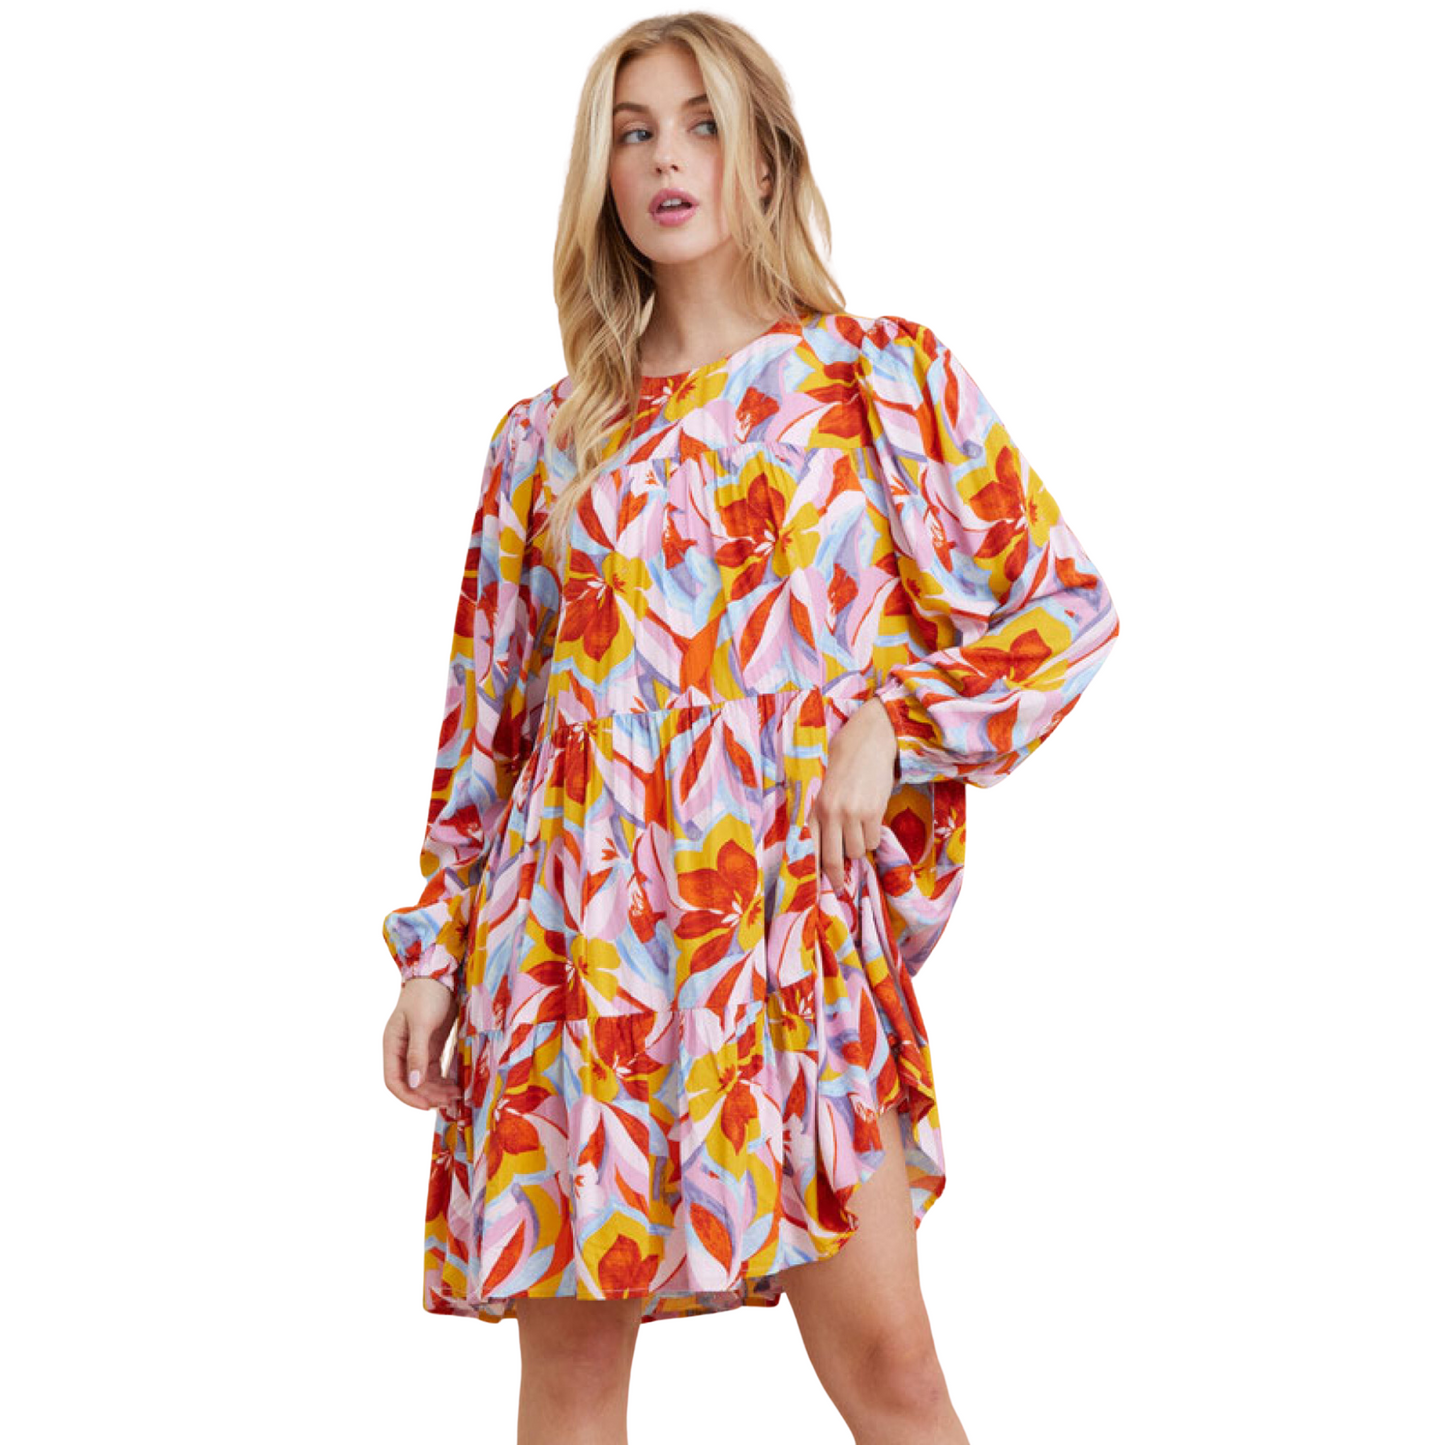 This Flower Print Mini Dress offers a U-neck cut and long peasant sleeves for a stylish, trendy look, all while ensuring a lightweight and comfortable fit. Crafted from non-sheer and unlined fabric, it's finished with a back keyhole and tiered layers for a modern silhouette. Plus size available.